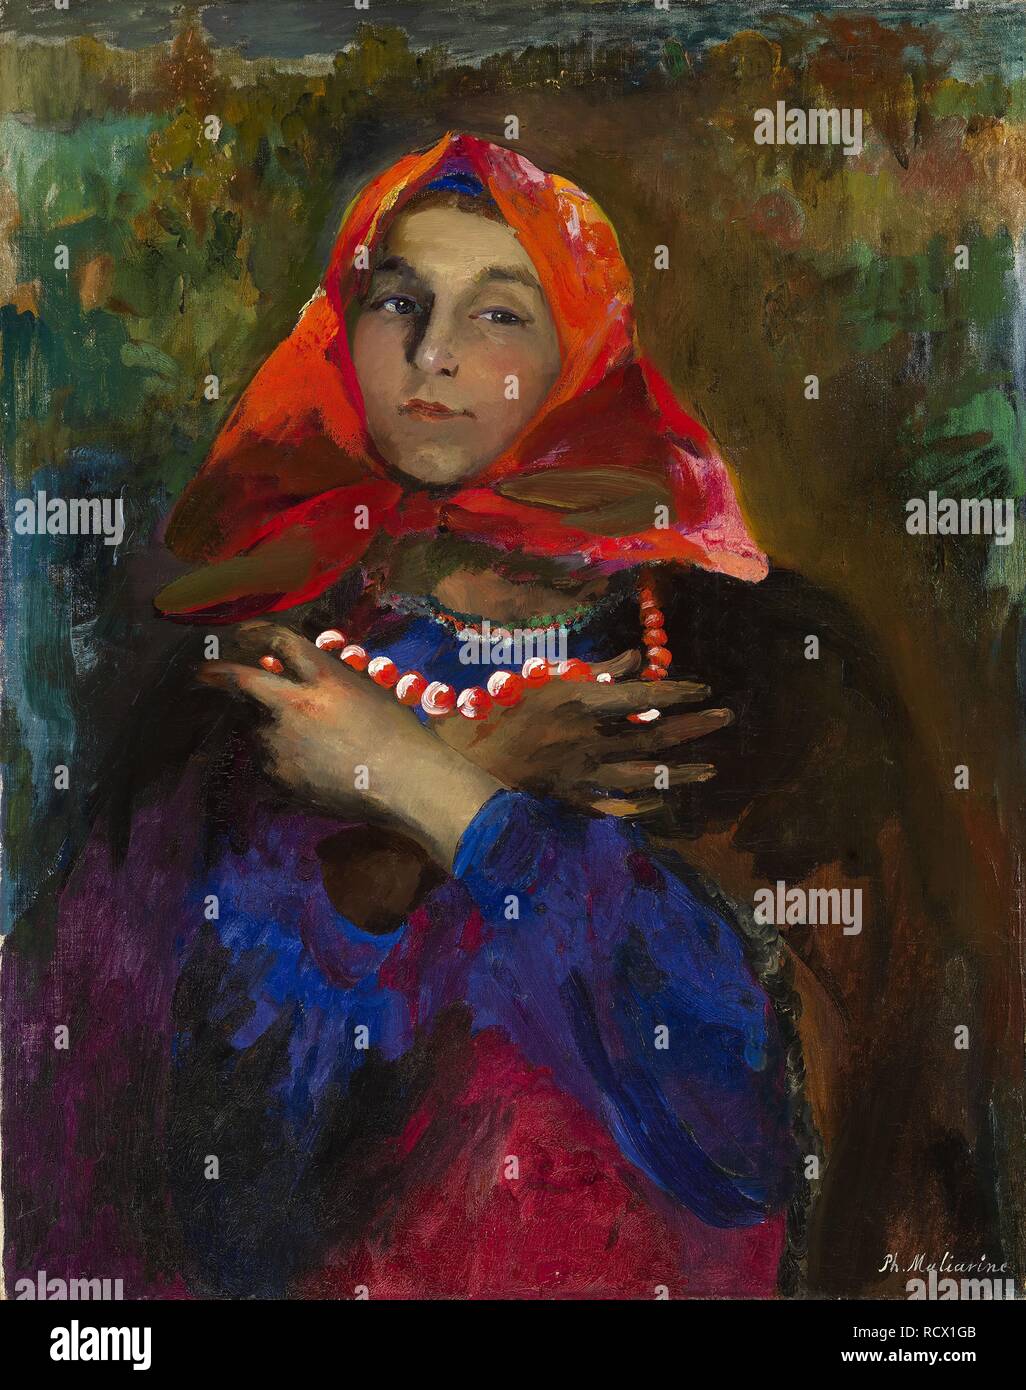 Russian Maiden in a Red Headscarf. Museum: PRIVATE COLLECTION. Author: Malyavin, Filipp Andreyevich. Stock Photo